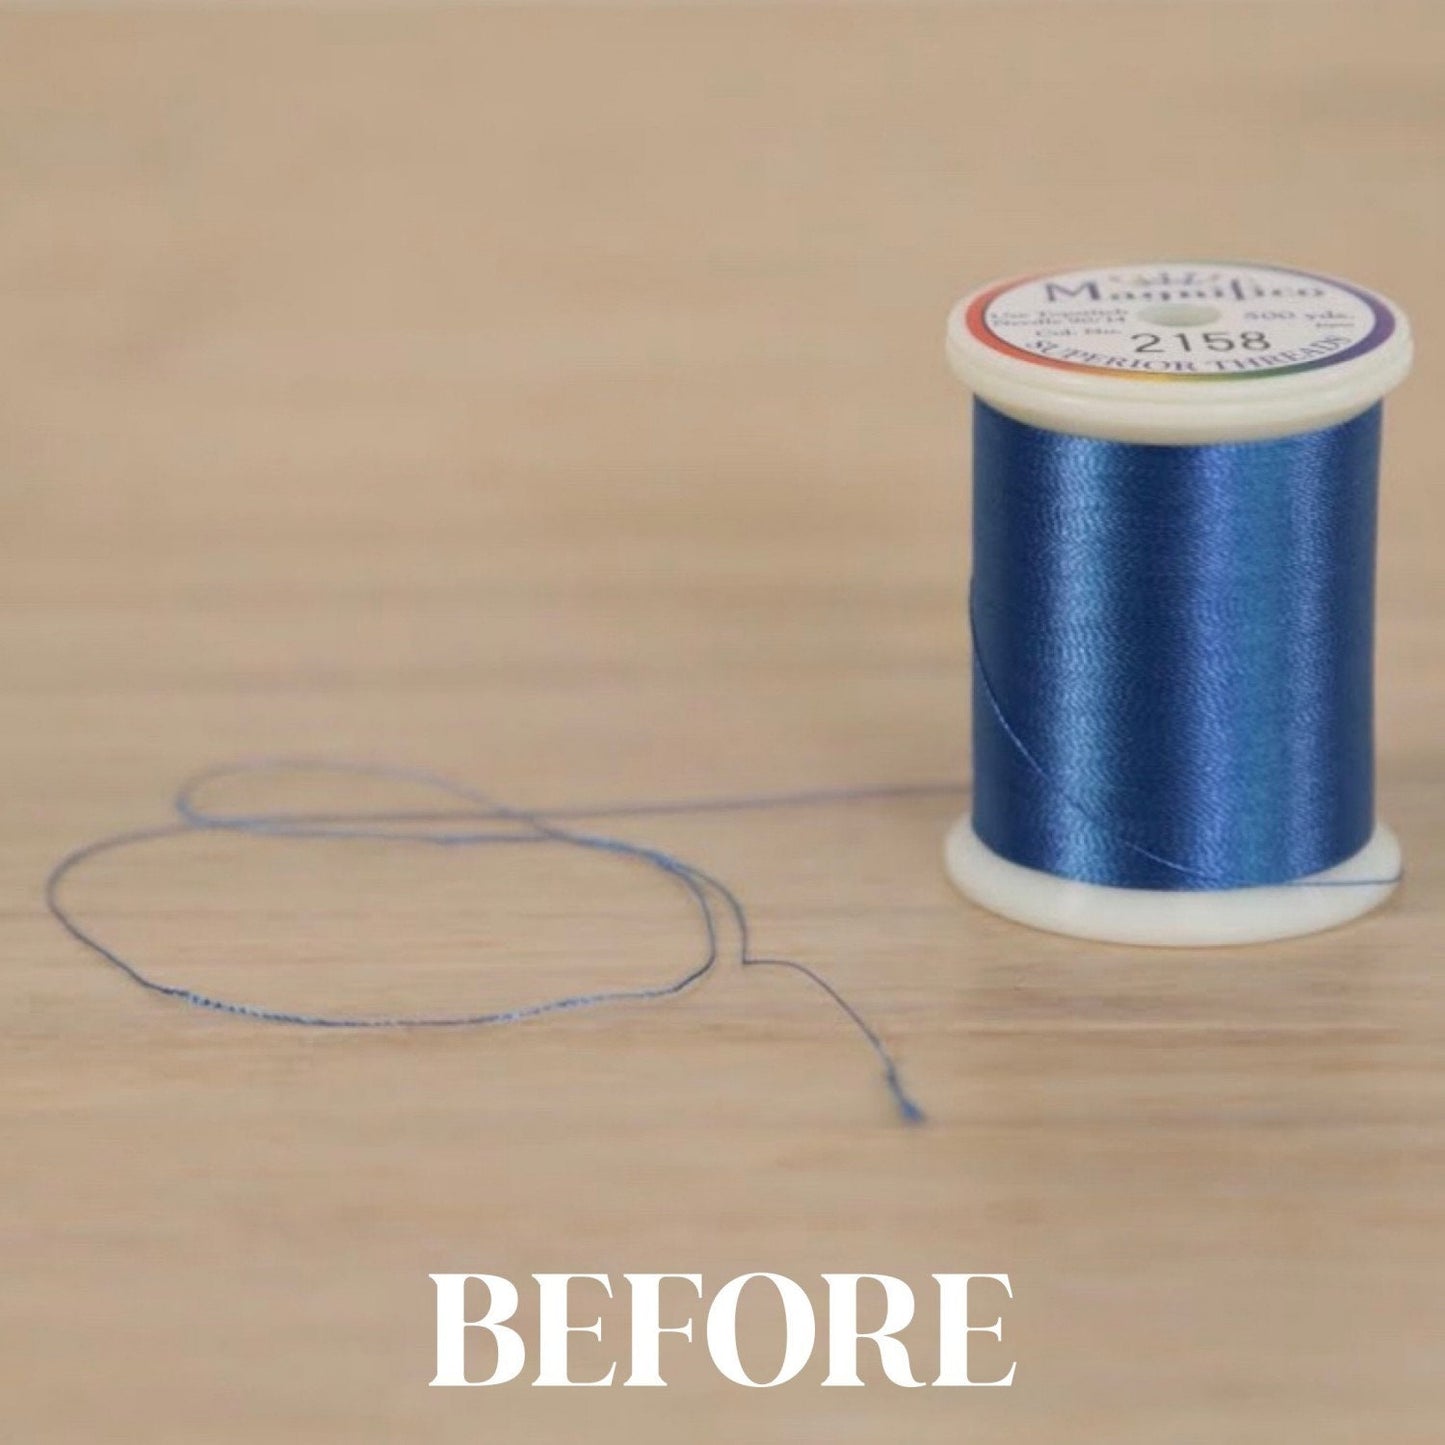 Hugo's Amazing Tape 1" x 50 ft Roll - keep your sewing threads neat and organized.  Self Adhering, Reusable